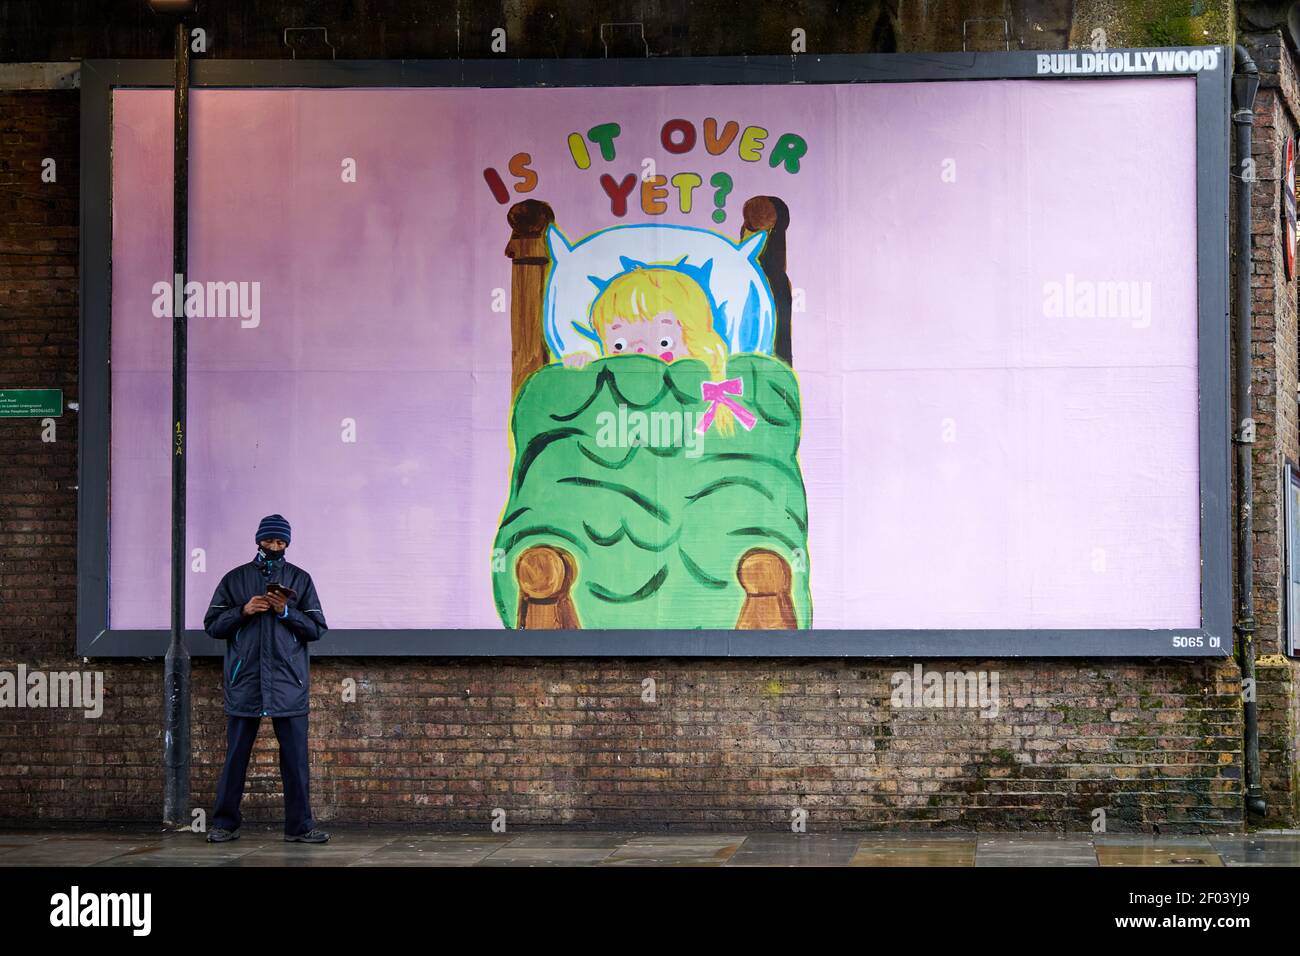 London, UK. - 17 Feb 2021: A face-masked pedestrian stands in front of a humourous fly-posted billboard questioning whether the COVID-19 coronavirus pandemic is over yet. Stock Photo